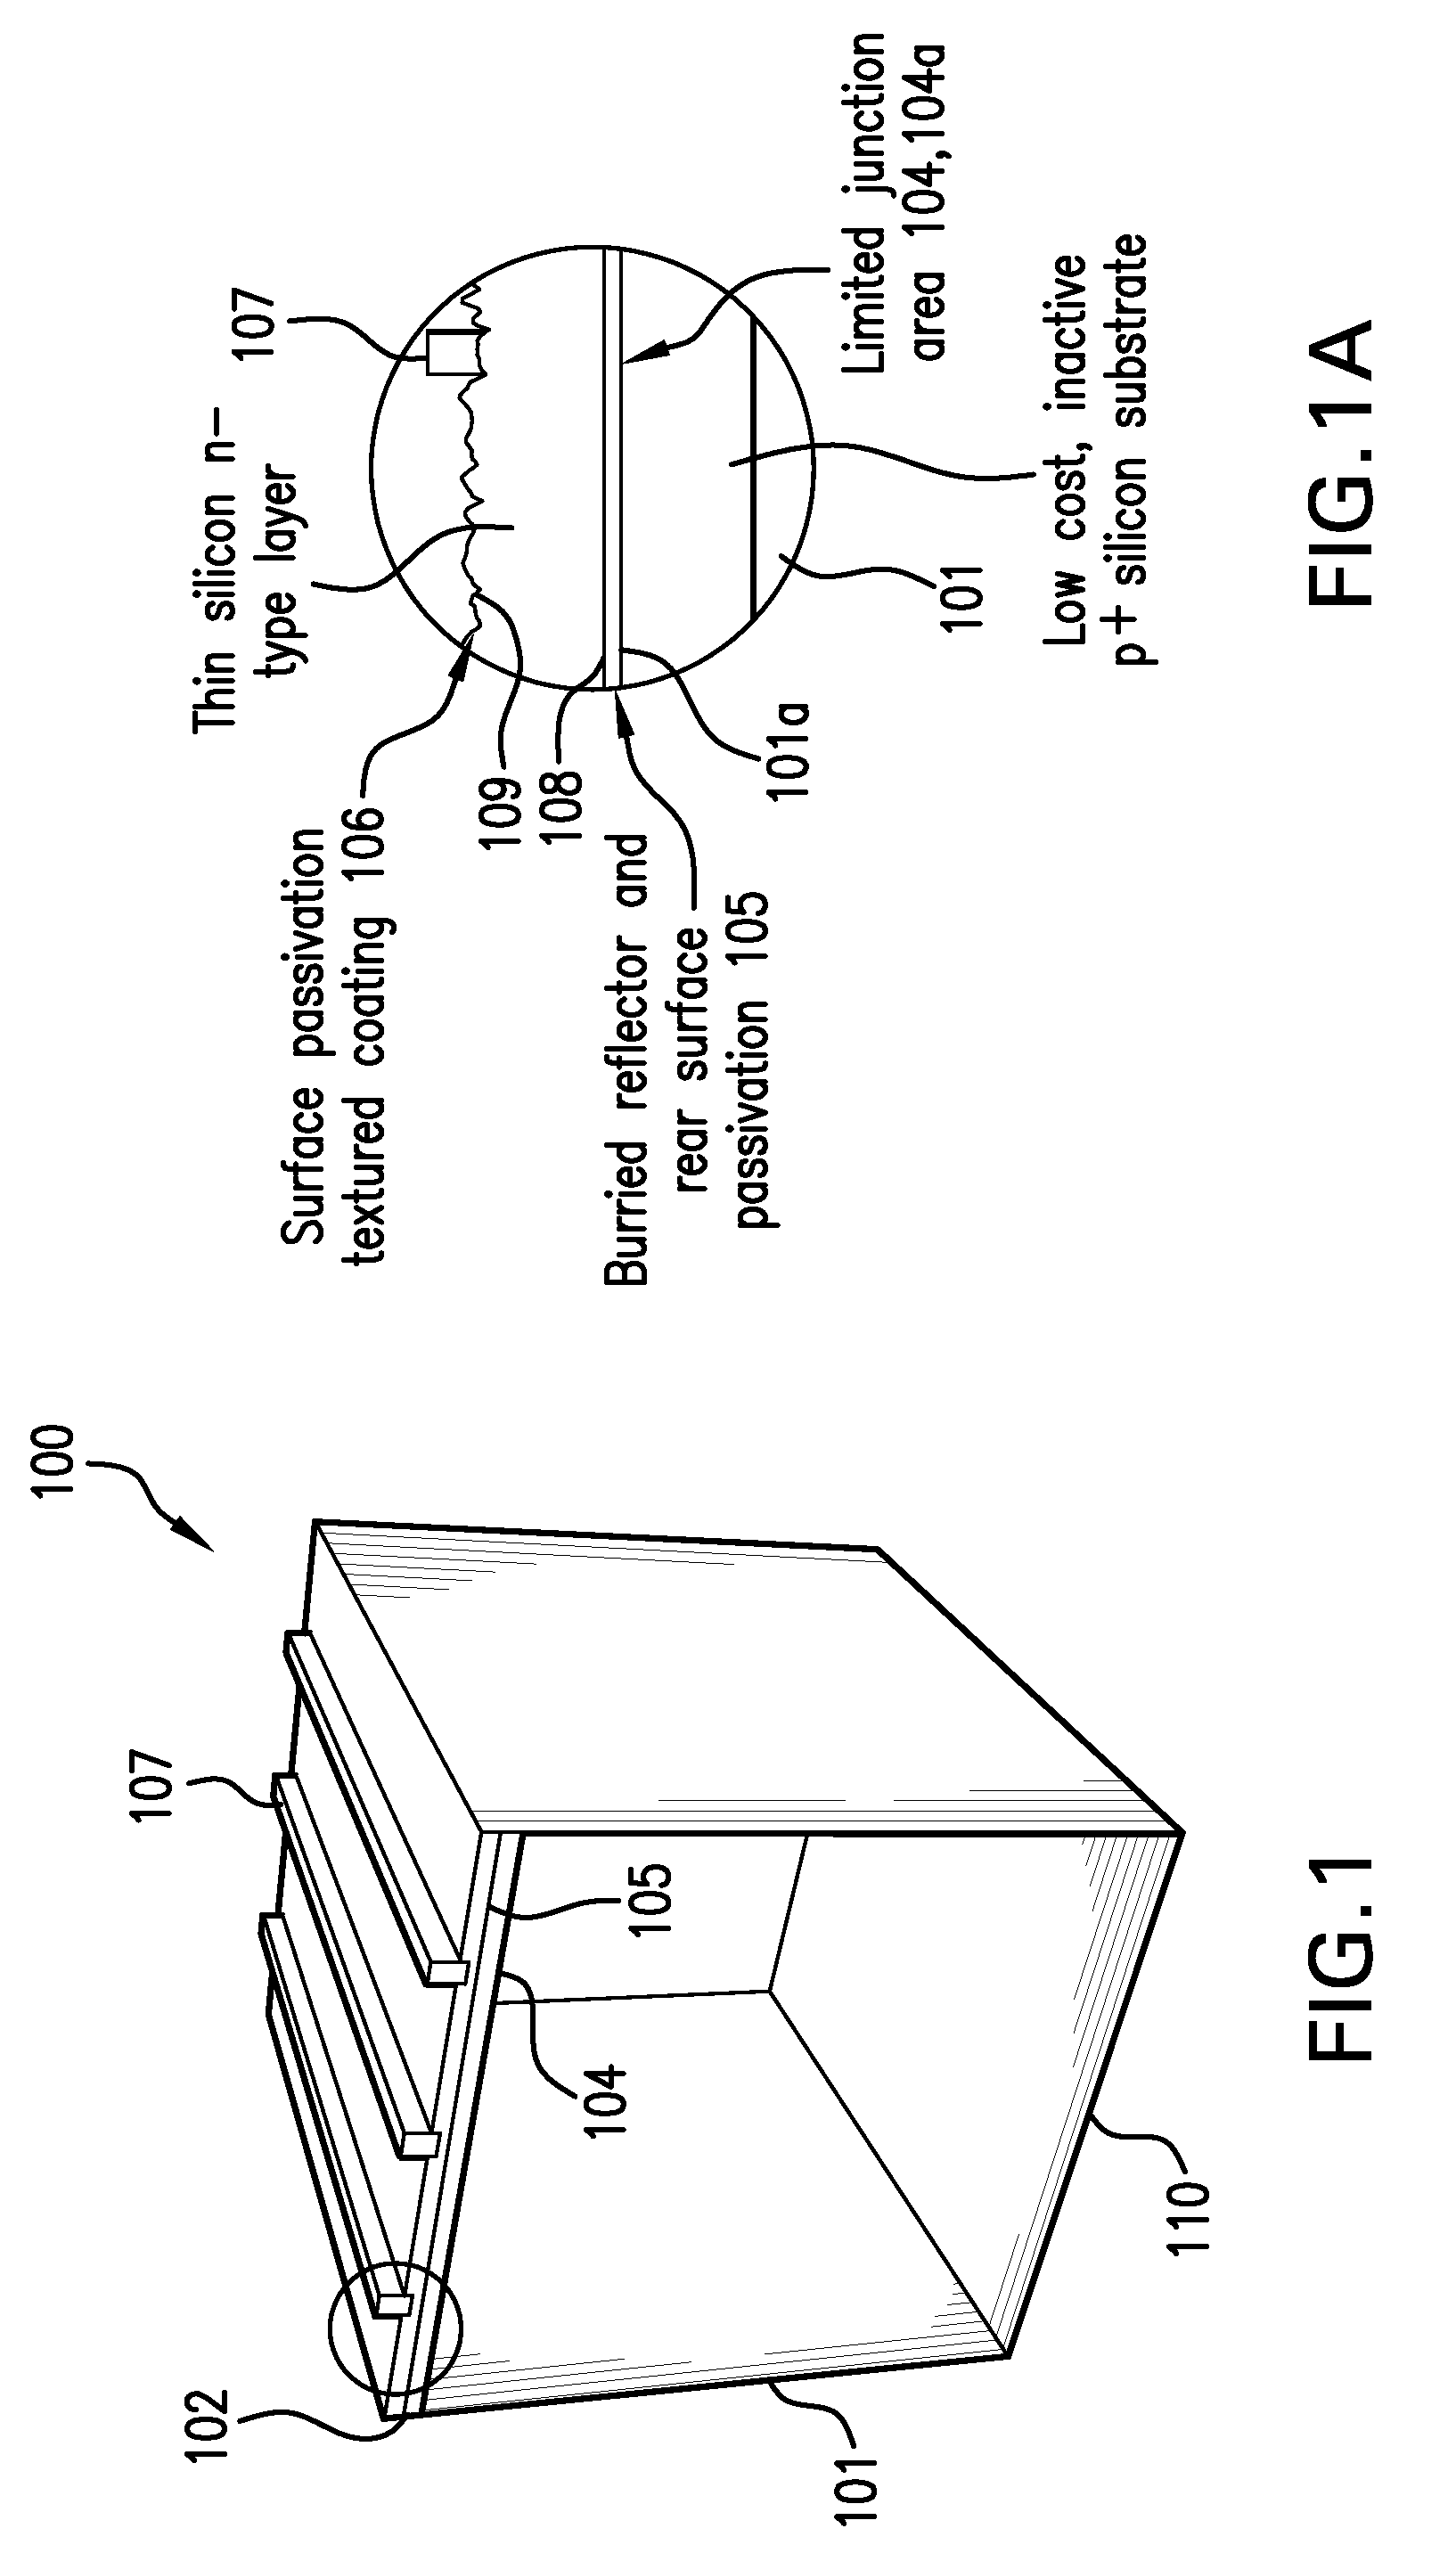 Photovoltaic Thin-Film Solar Cell and Method Of Making The Same